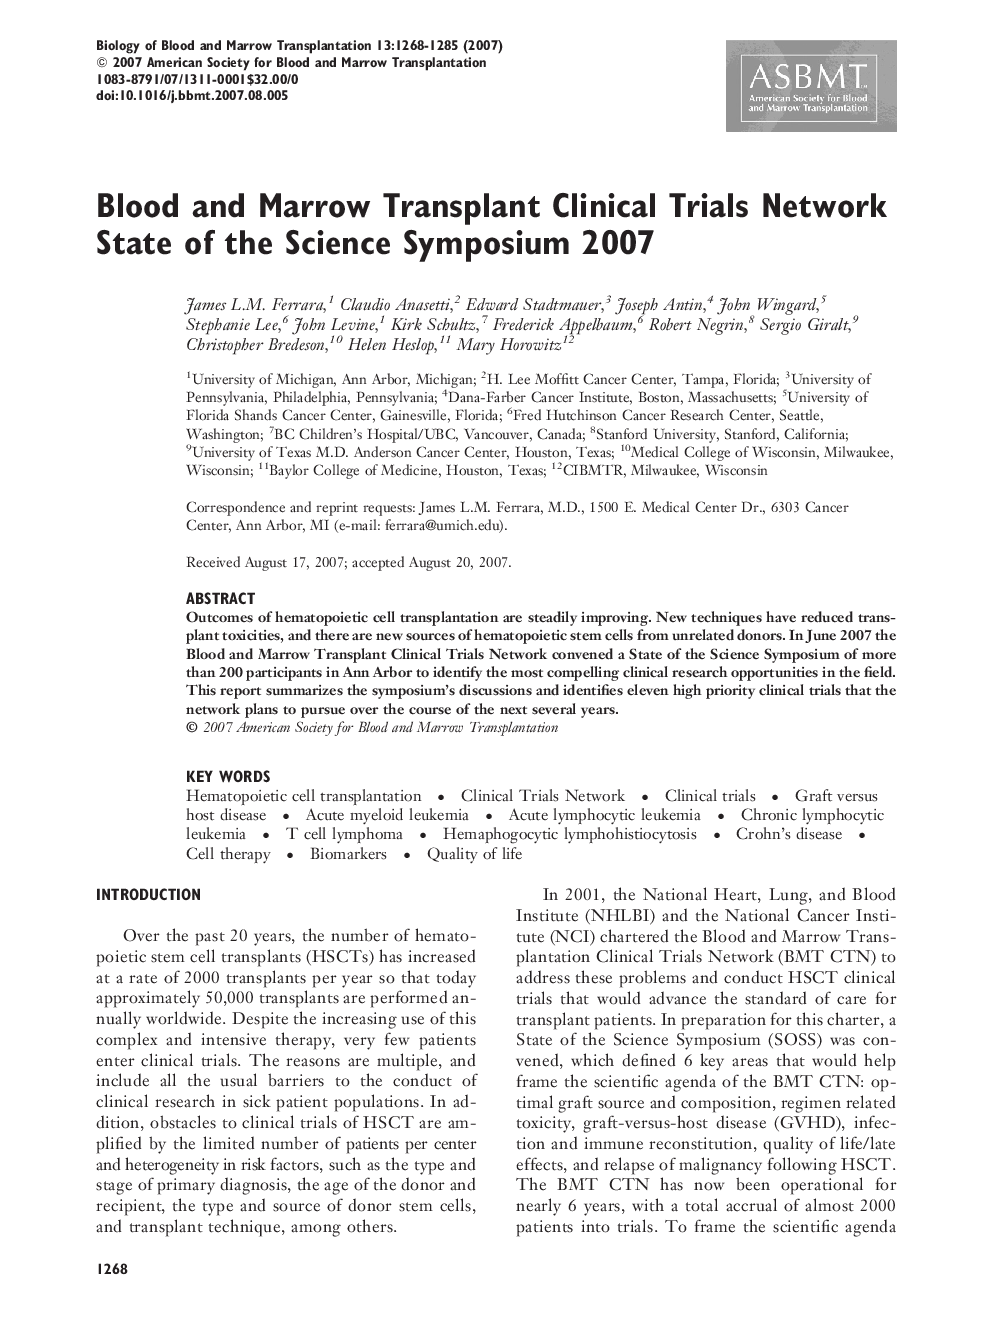 Blood and Marrow Transplant Clinical Trials Network State of the Science Symposium 2007